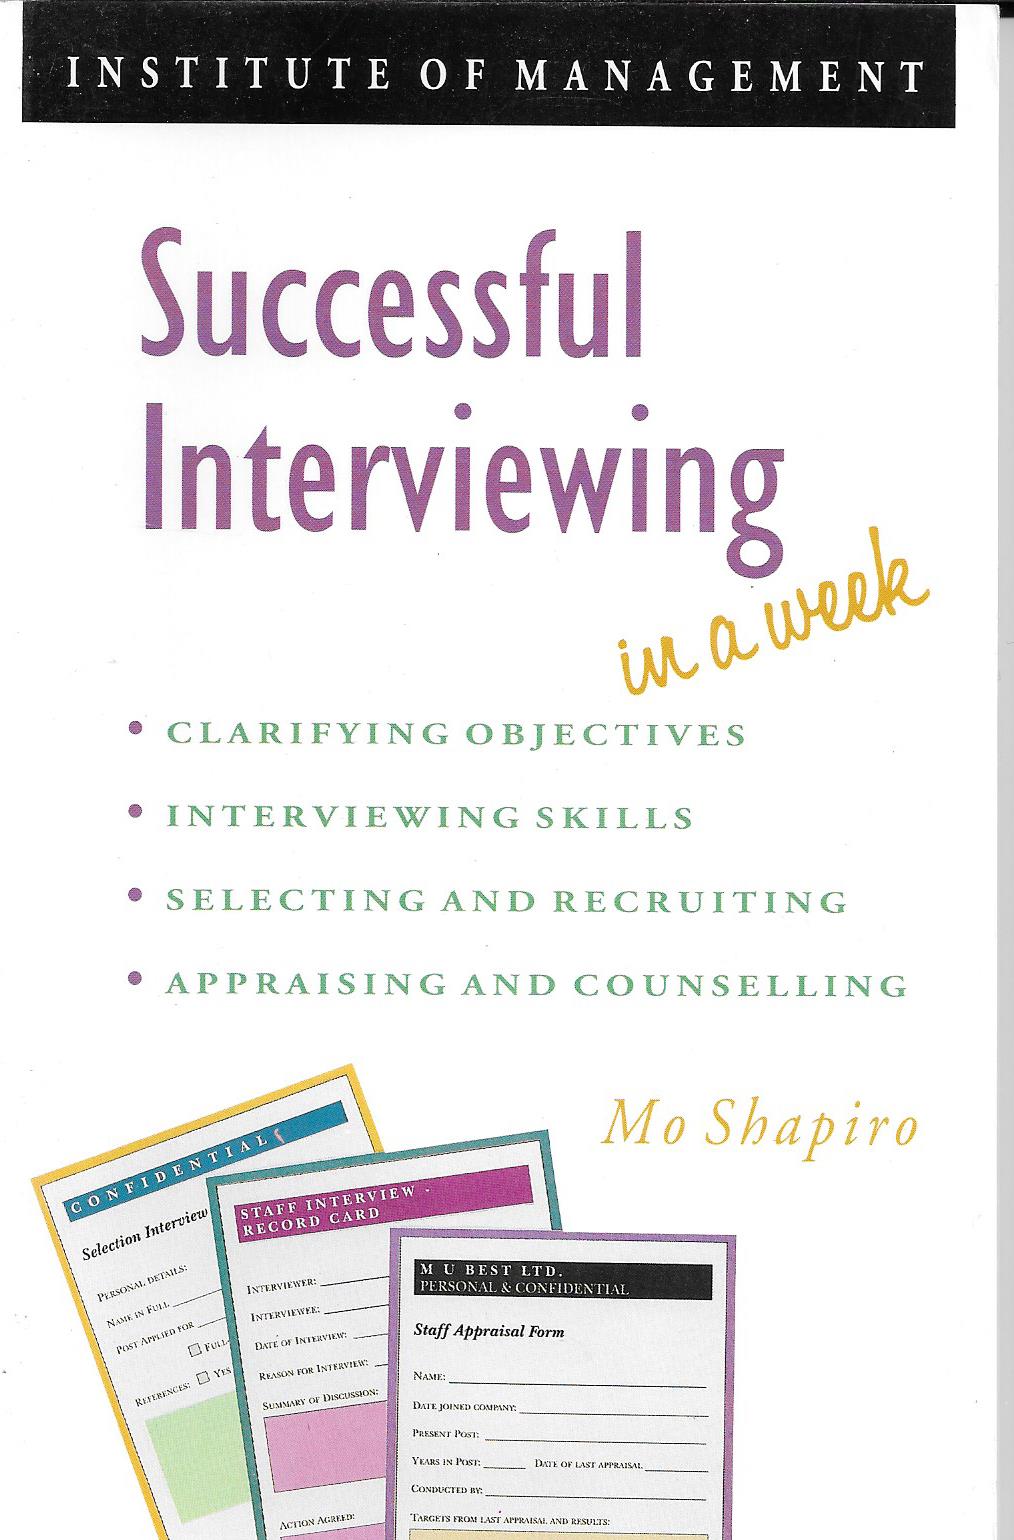 Successful Interviewing in a Week